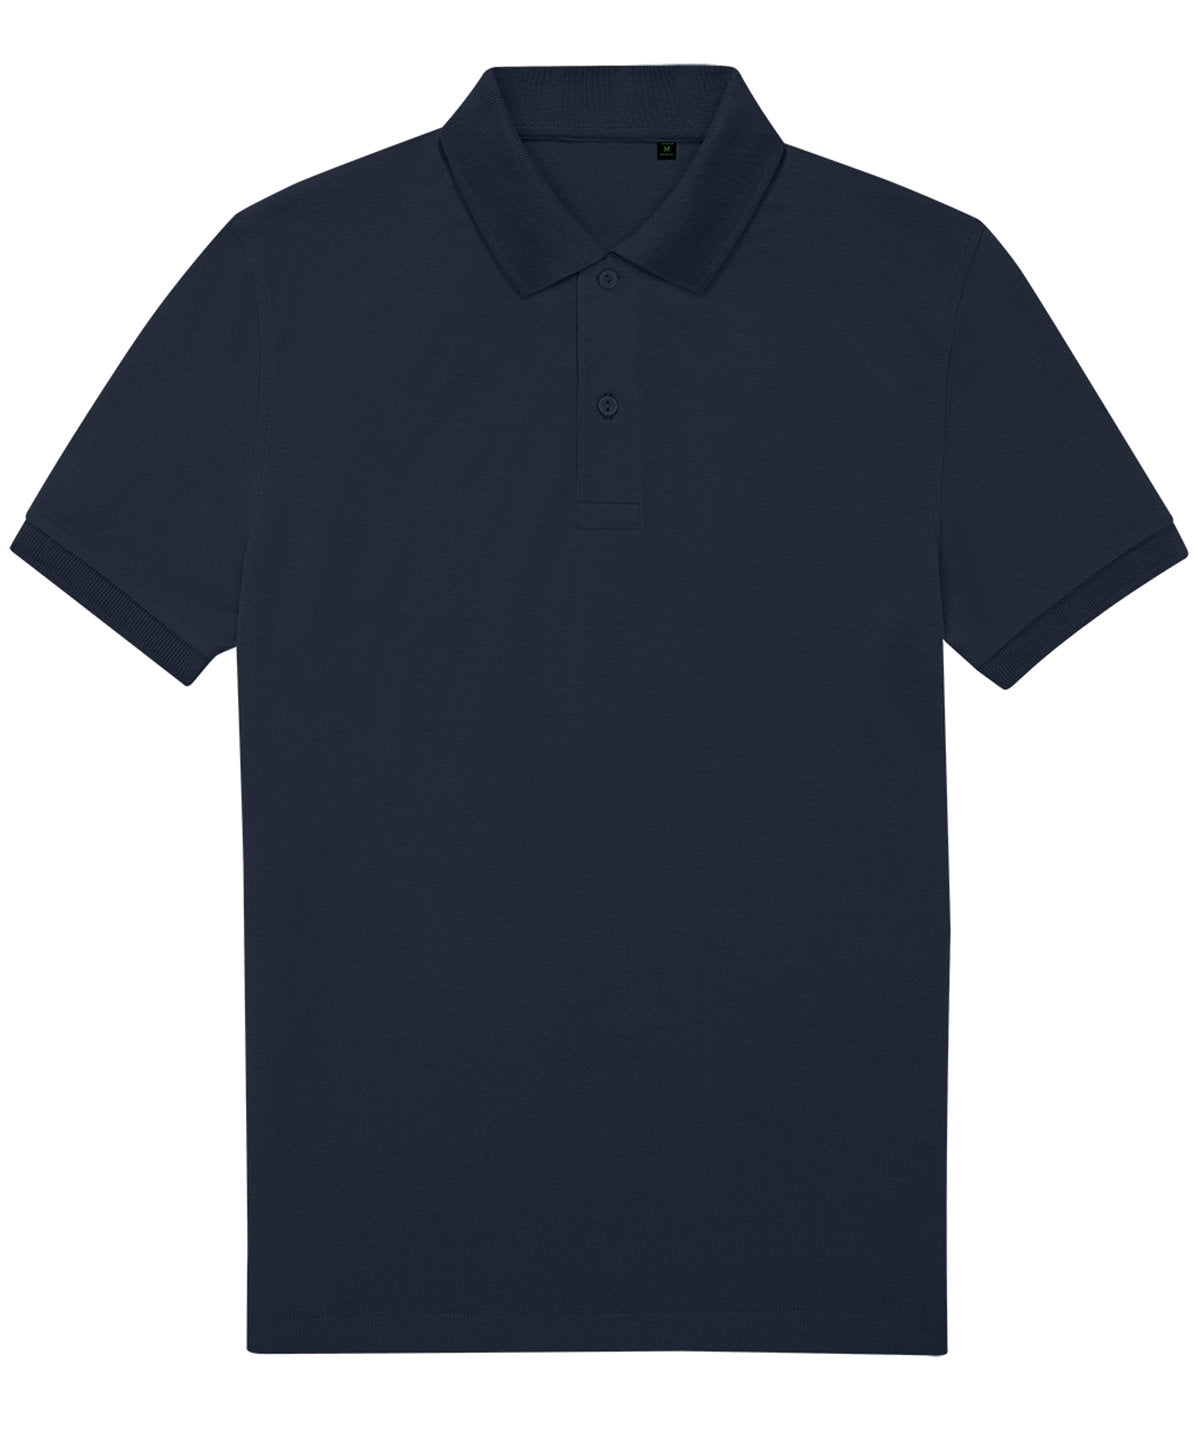 Personalised Polo Shirts - Black B&C Collection B&C My Eco Polo 65/35